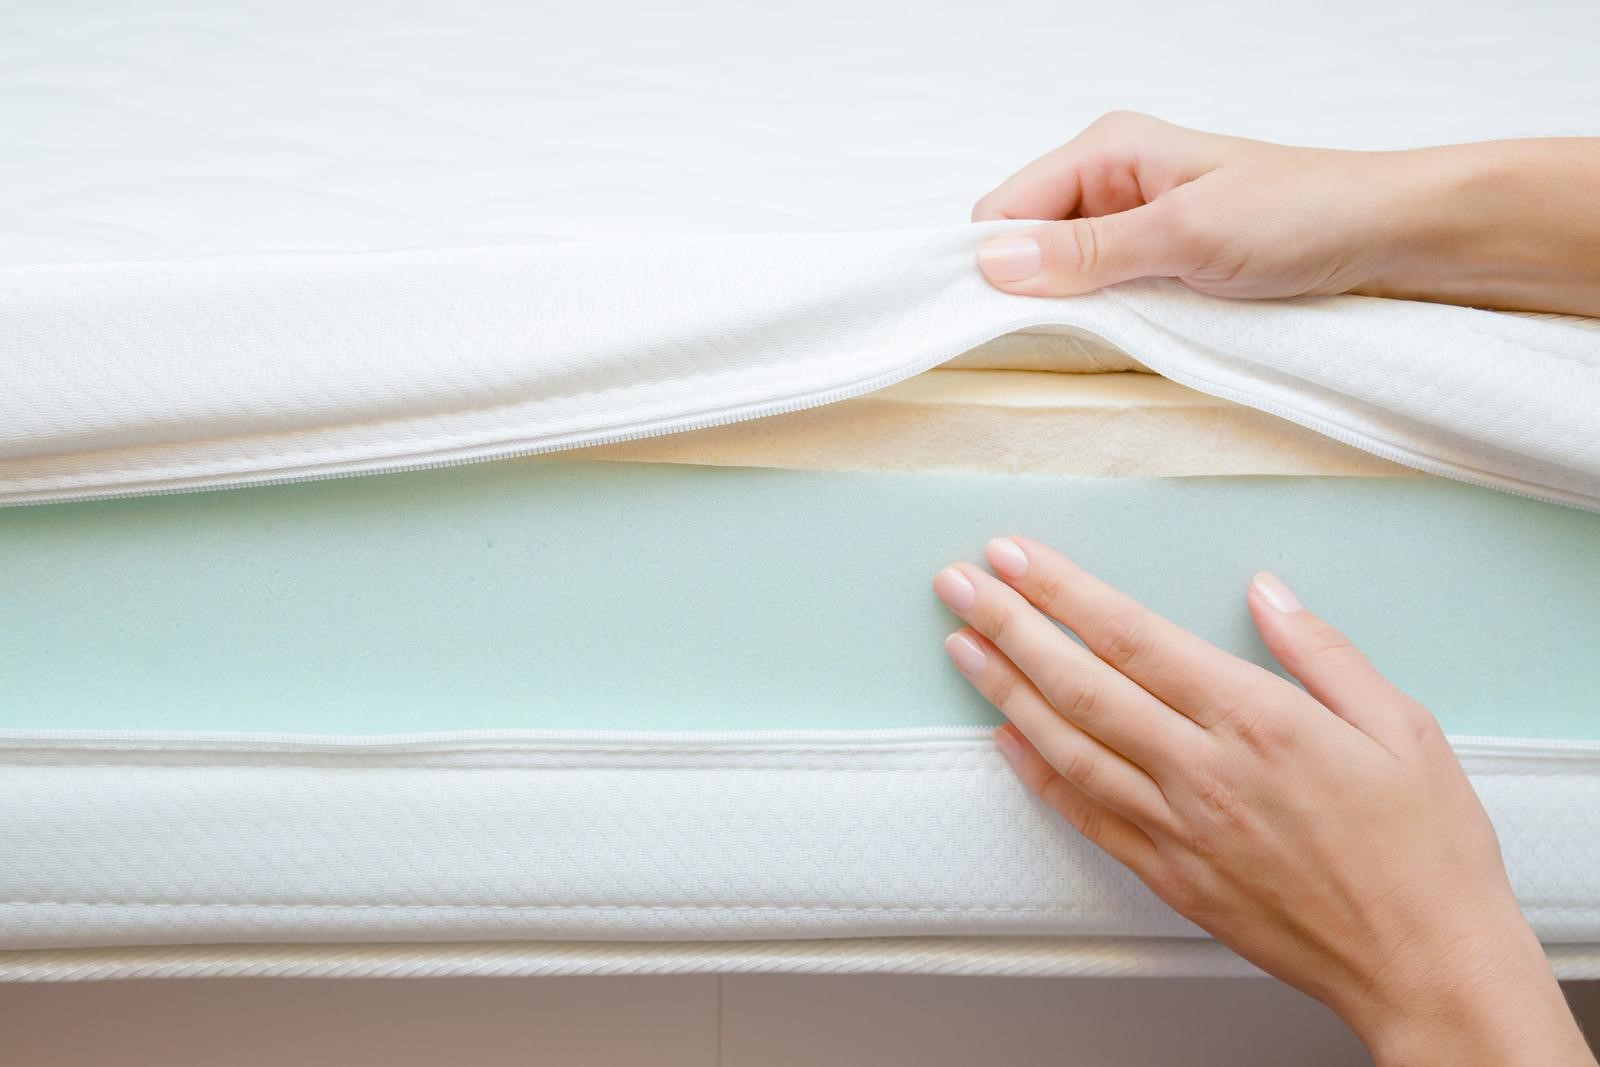 How to choose the best memory foam mattress based on firmness